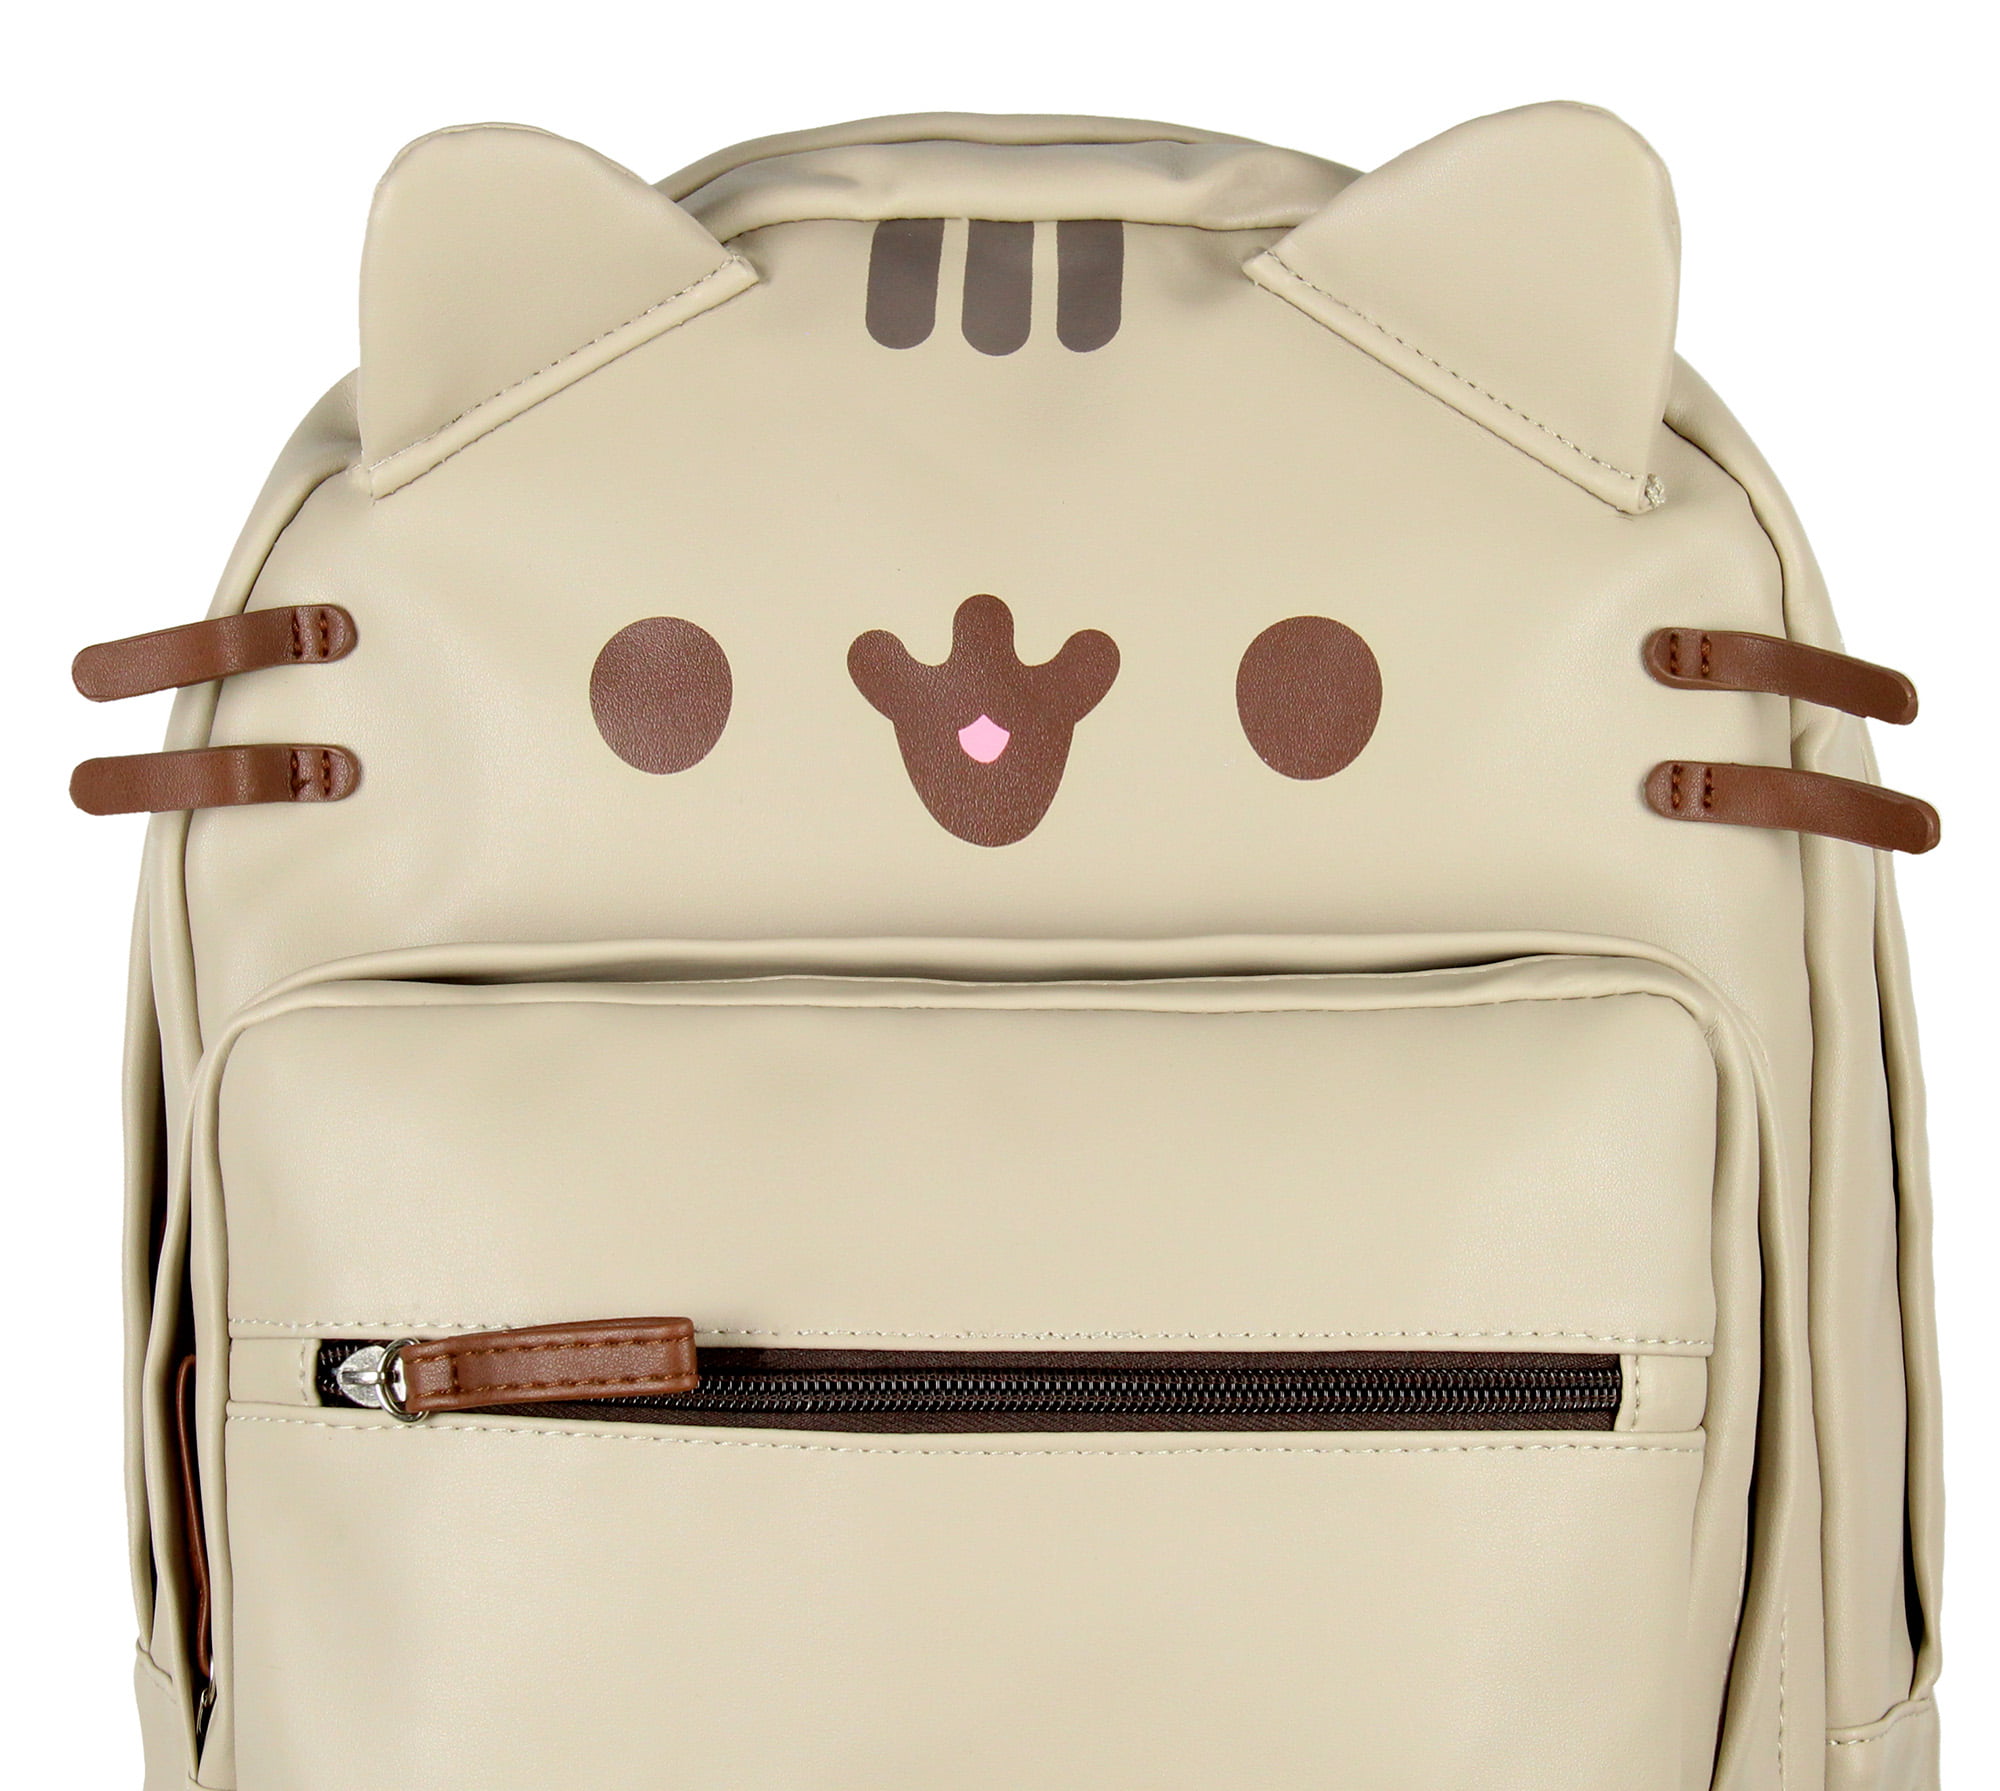 lont Zo snel als een flits Gehuurd Pusheen Cat Face PU Leather Backpack with 3D Ears and Whiskers - Walmart.com